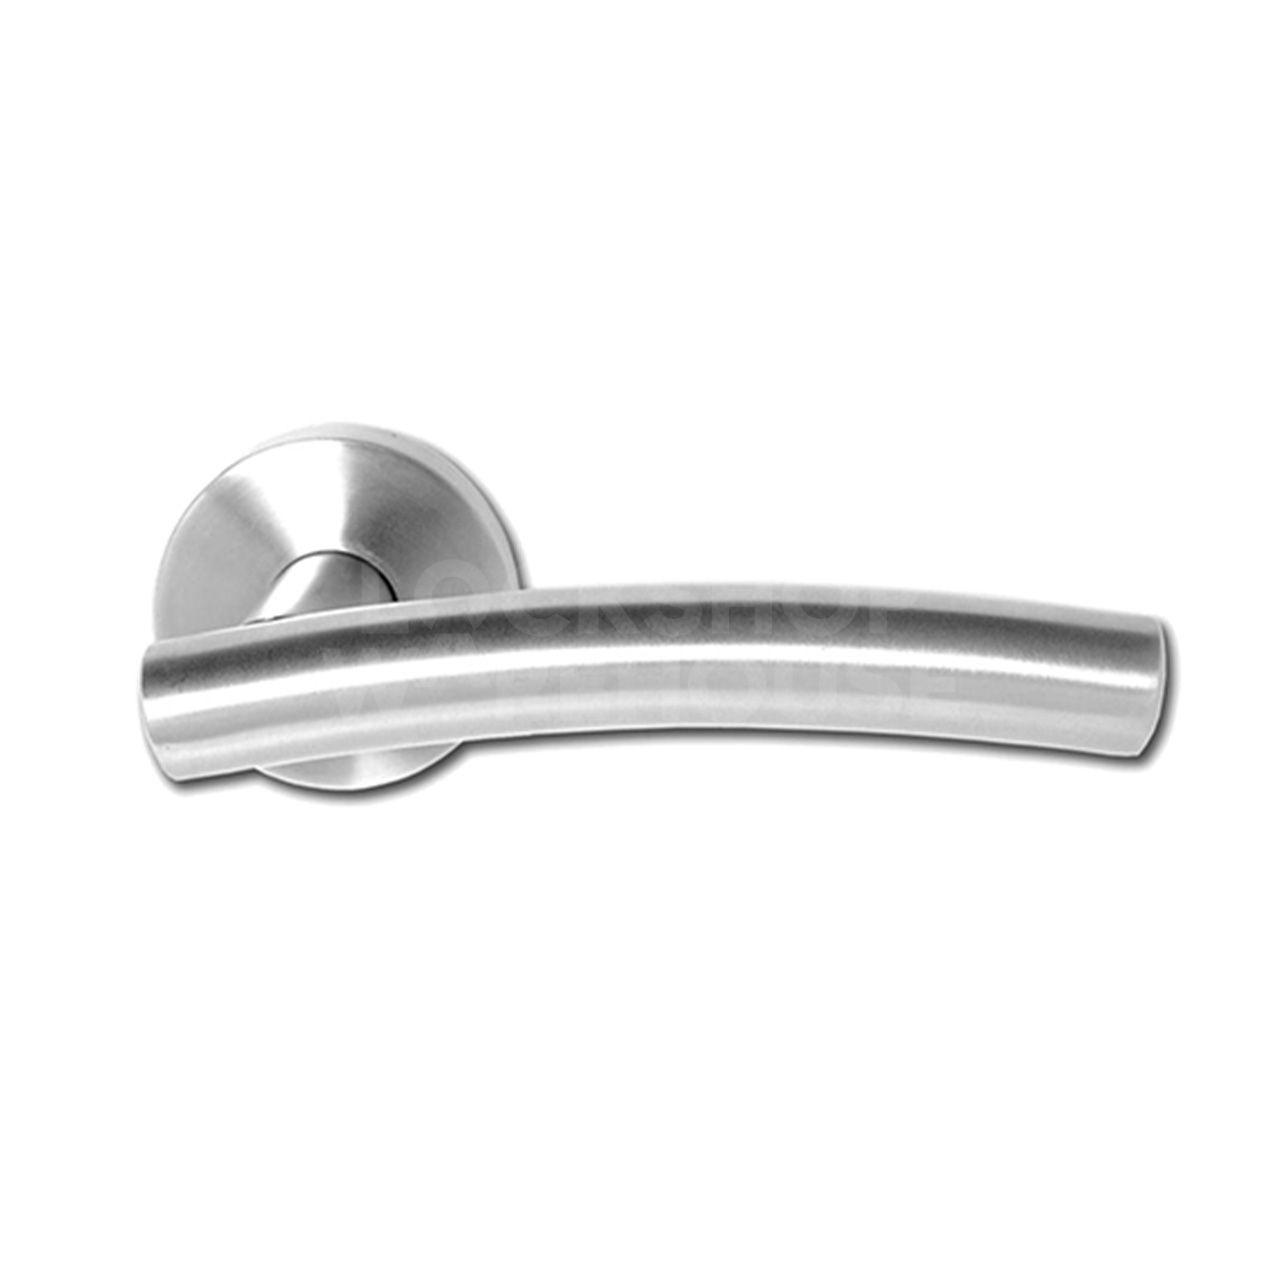 Pair of Stainless Steel Lever Handles on a Round Nose